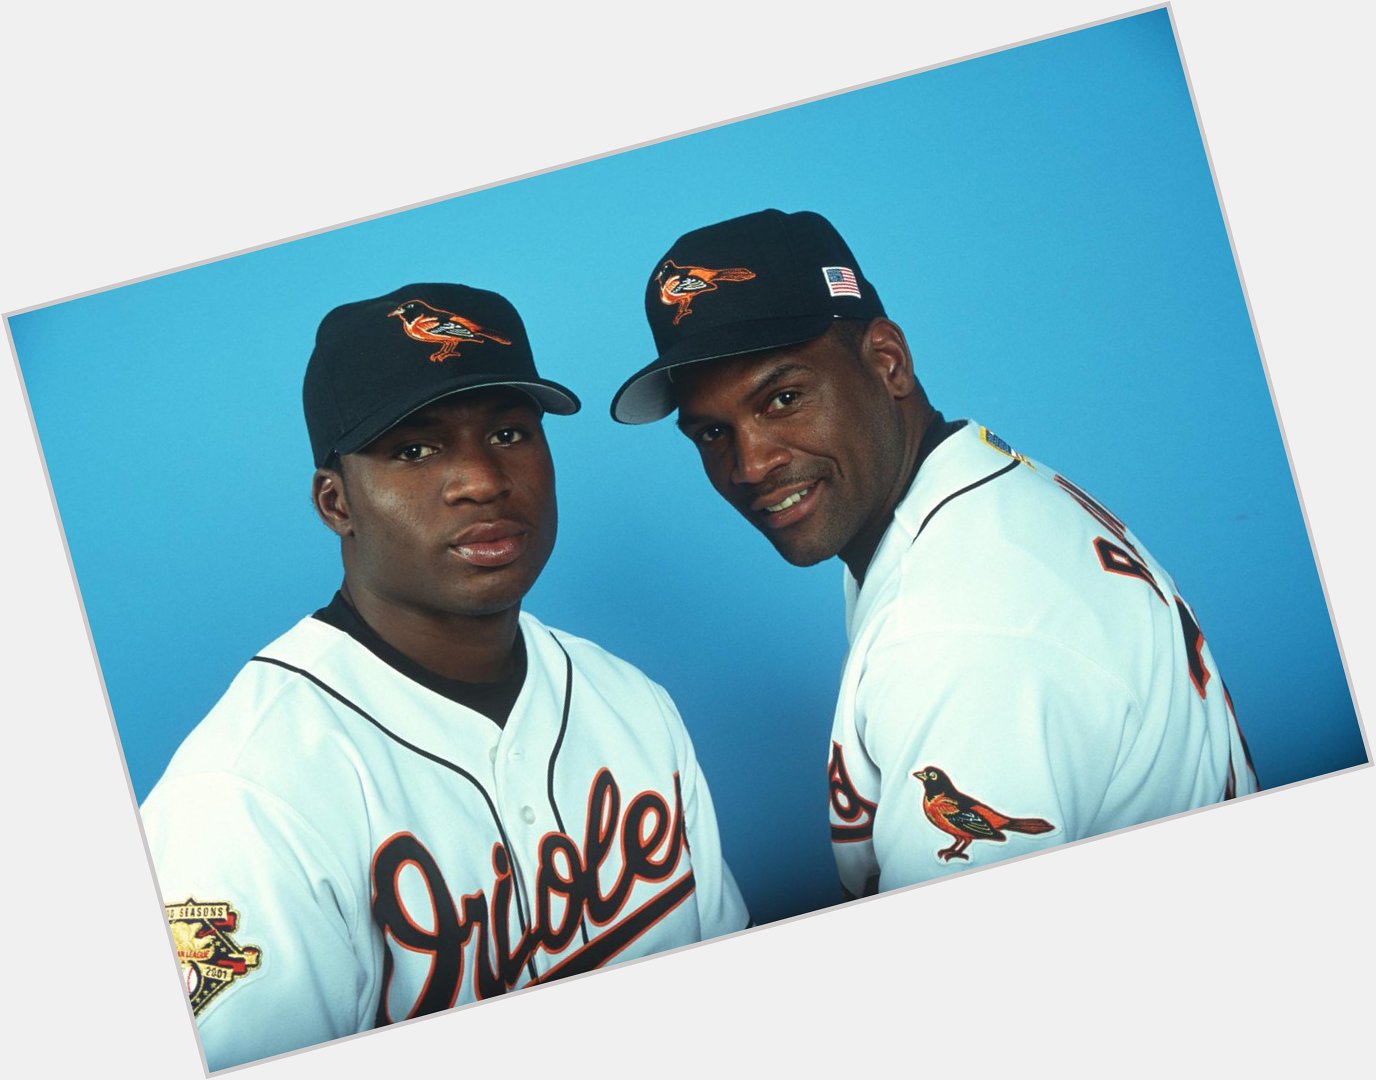 Happy birthday to Hall of Famer Tim Raines, who briefly played with his son, Tim Jr, on the Orioles 